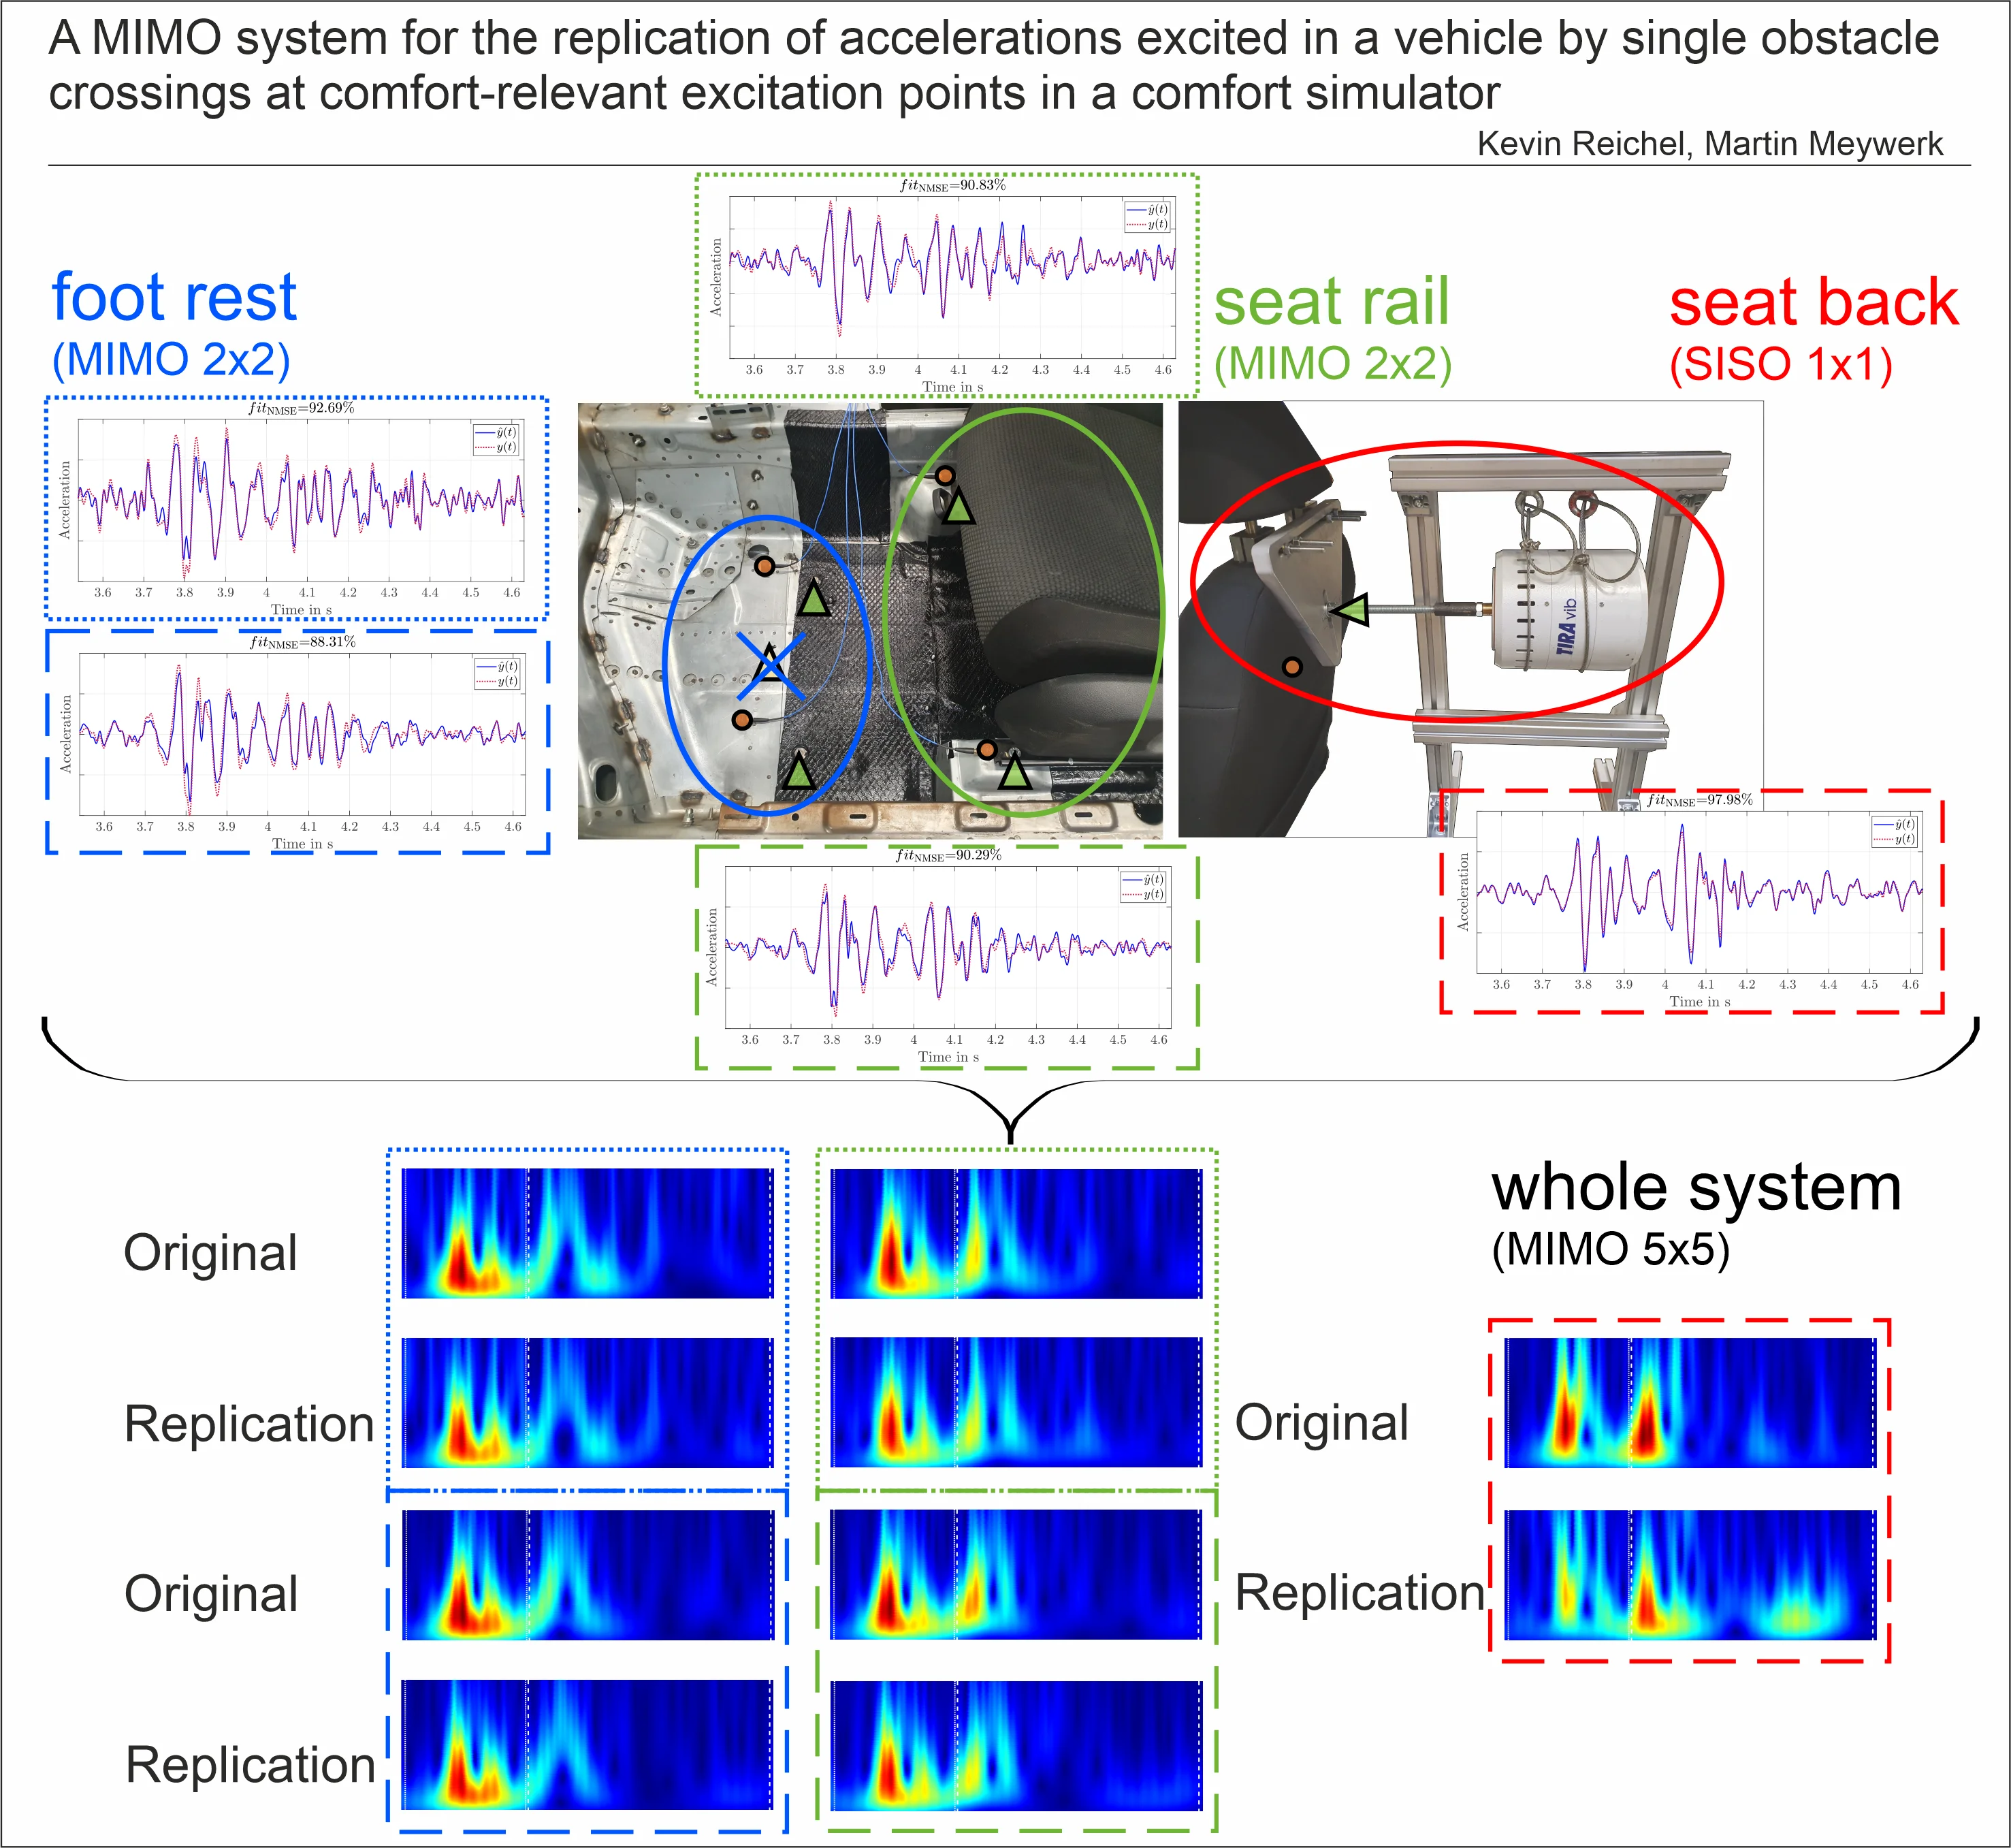 A MIMO system for the replication of accelerations excited in a vehicle by single obstacle crossings at comfort-relevant excitation points in a comfort simulator